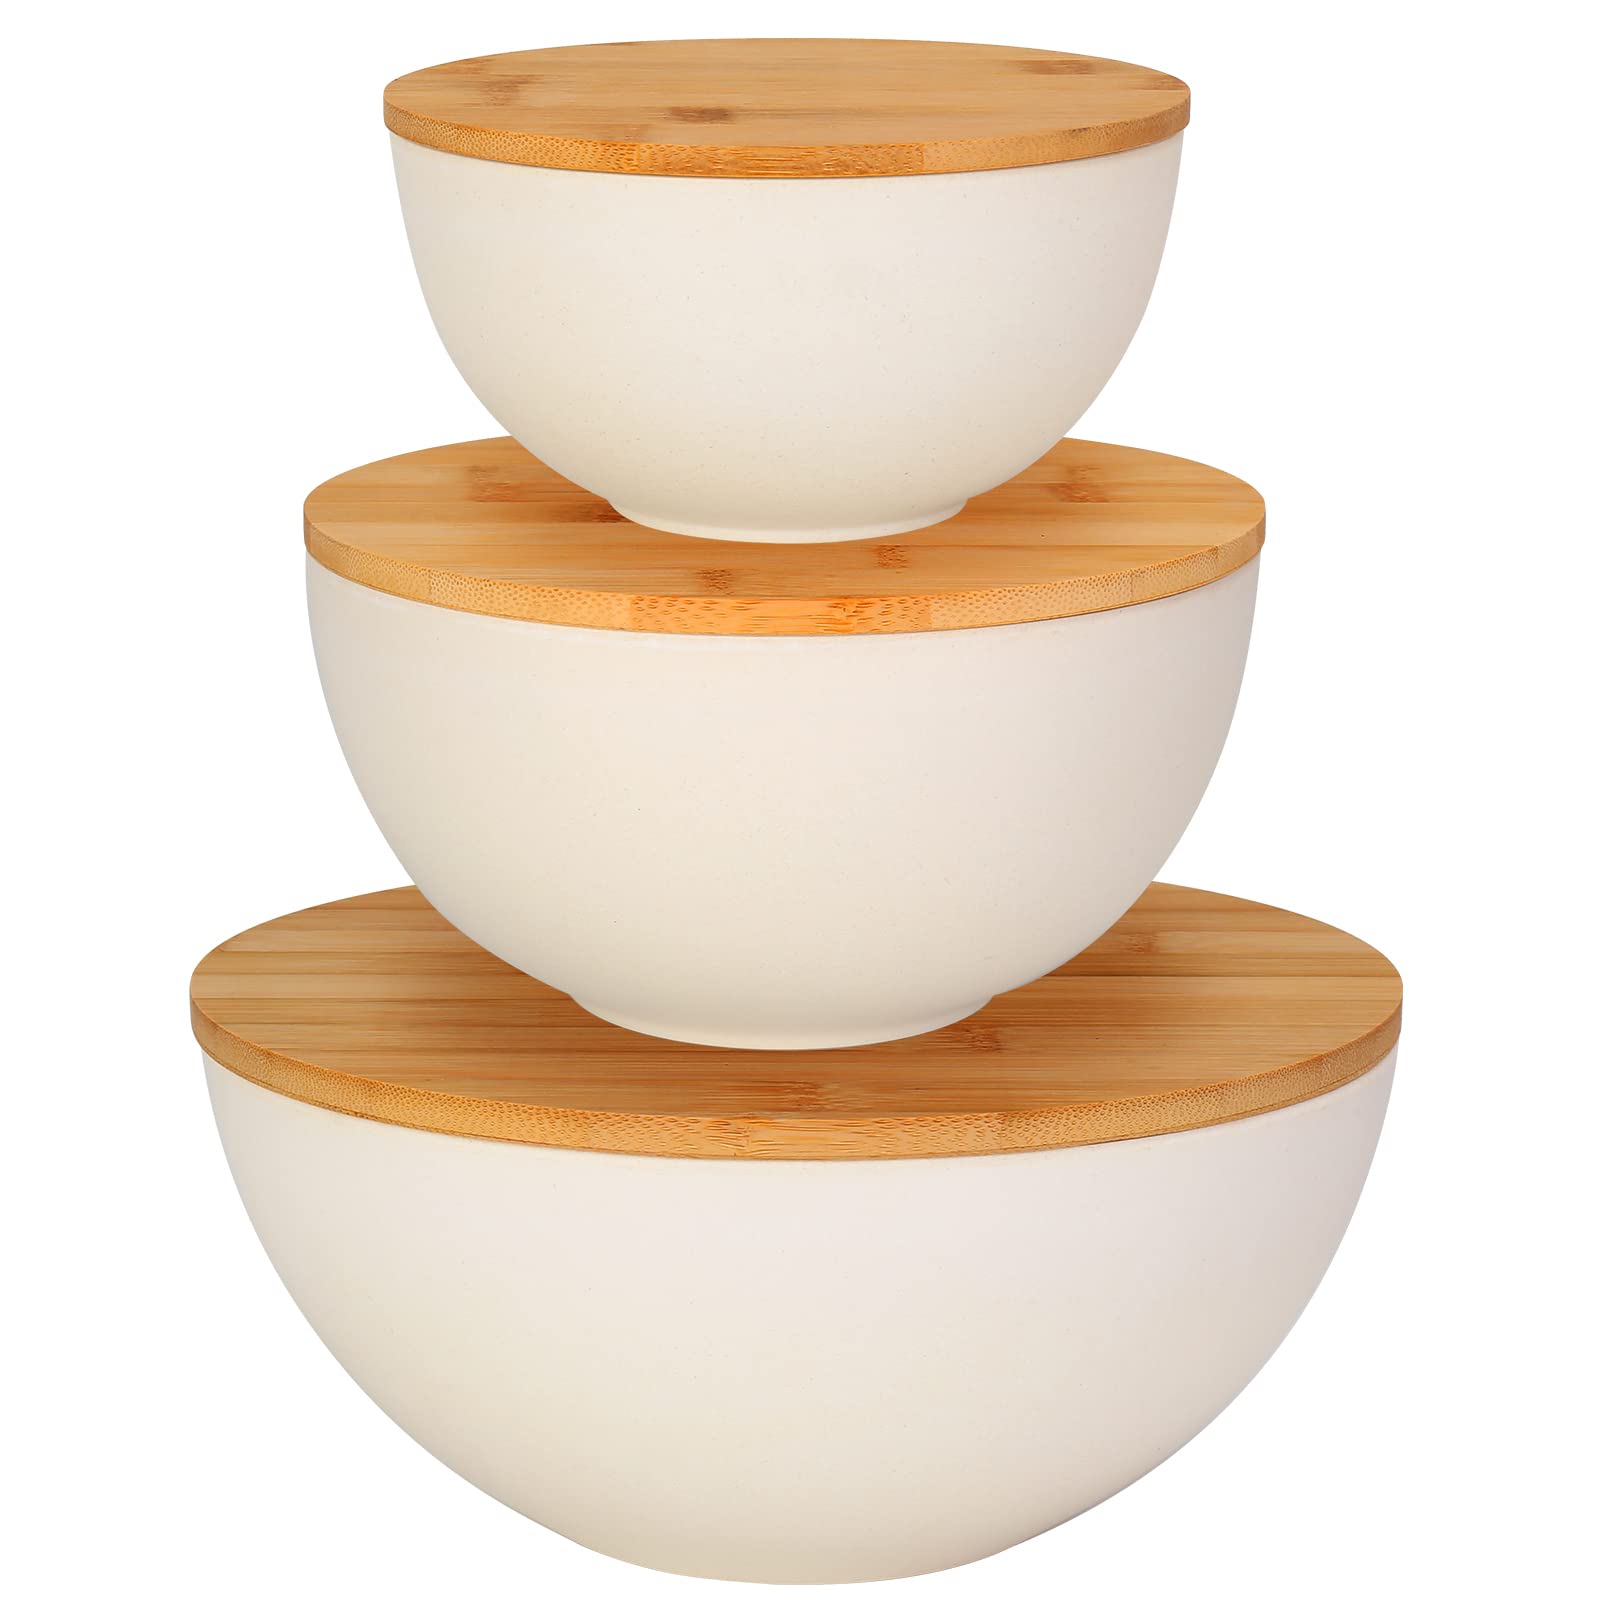 ShineMe Salad Bowl with Lid, Natural Bamboo Fiber Serving Bowls Set of 3 with Utensils & Lids, Mixing Bowls for Preparing, Storing and Serving for Cereal, Fruit,Chips, Bread(10",8",6")